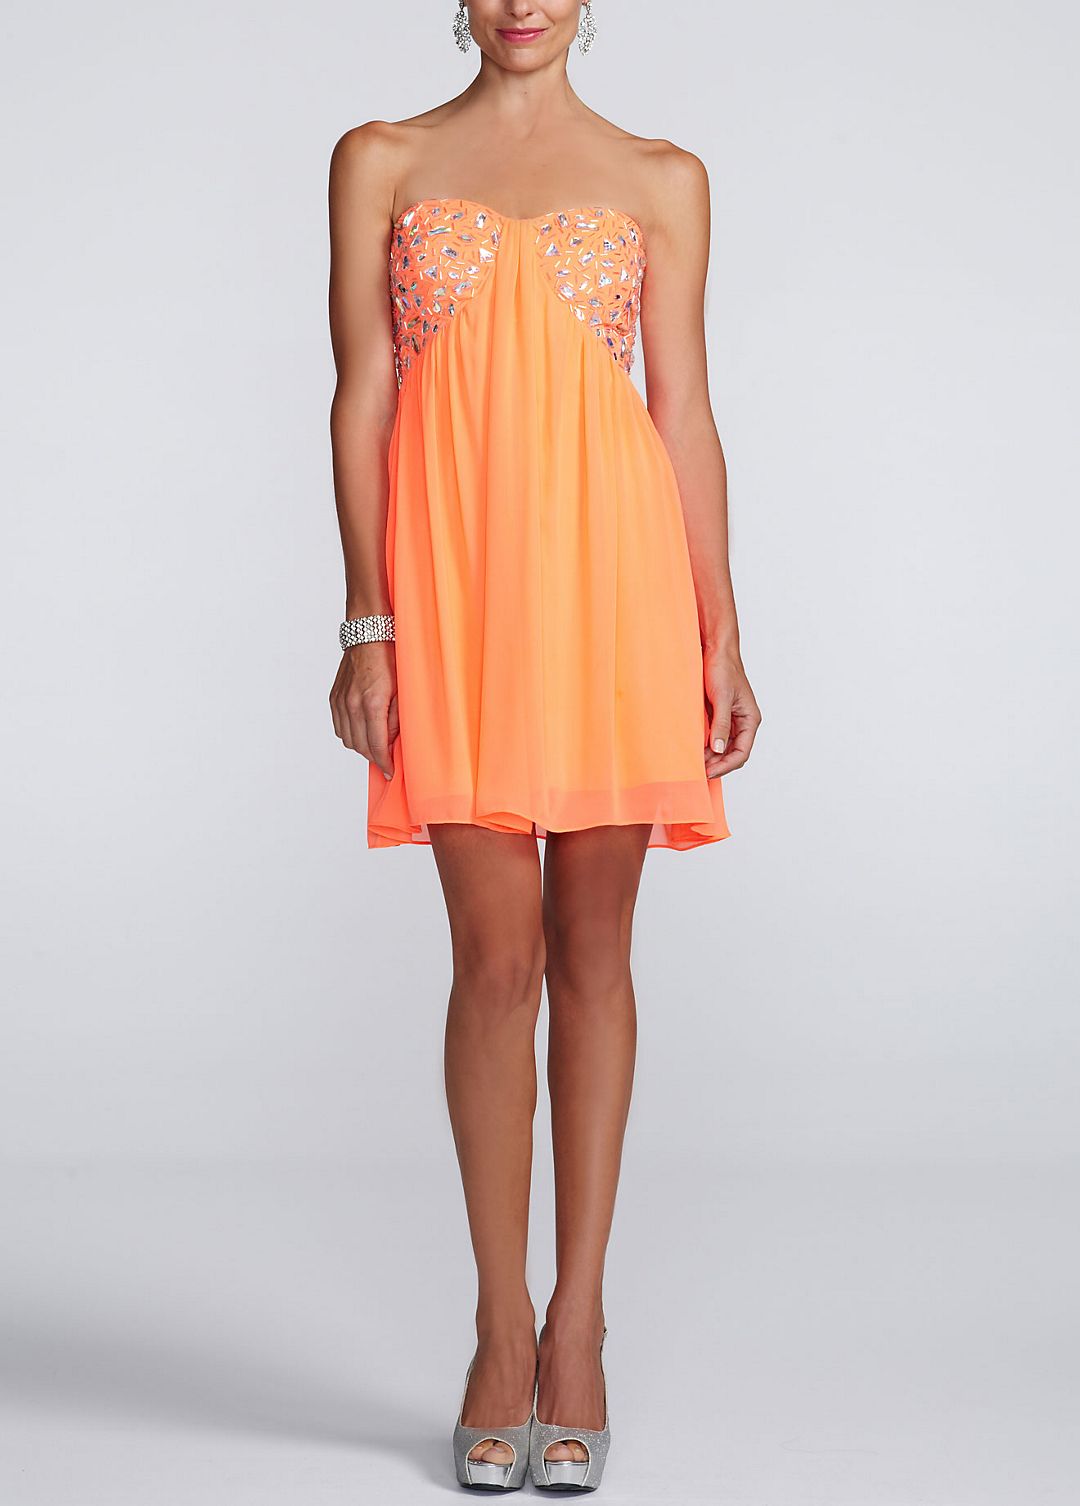 Strapless Chiffon Dress with Chunky Beaded Detail Image